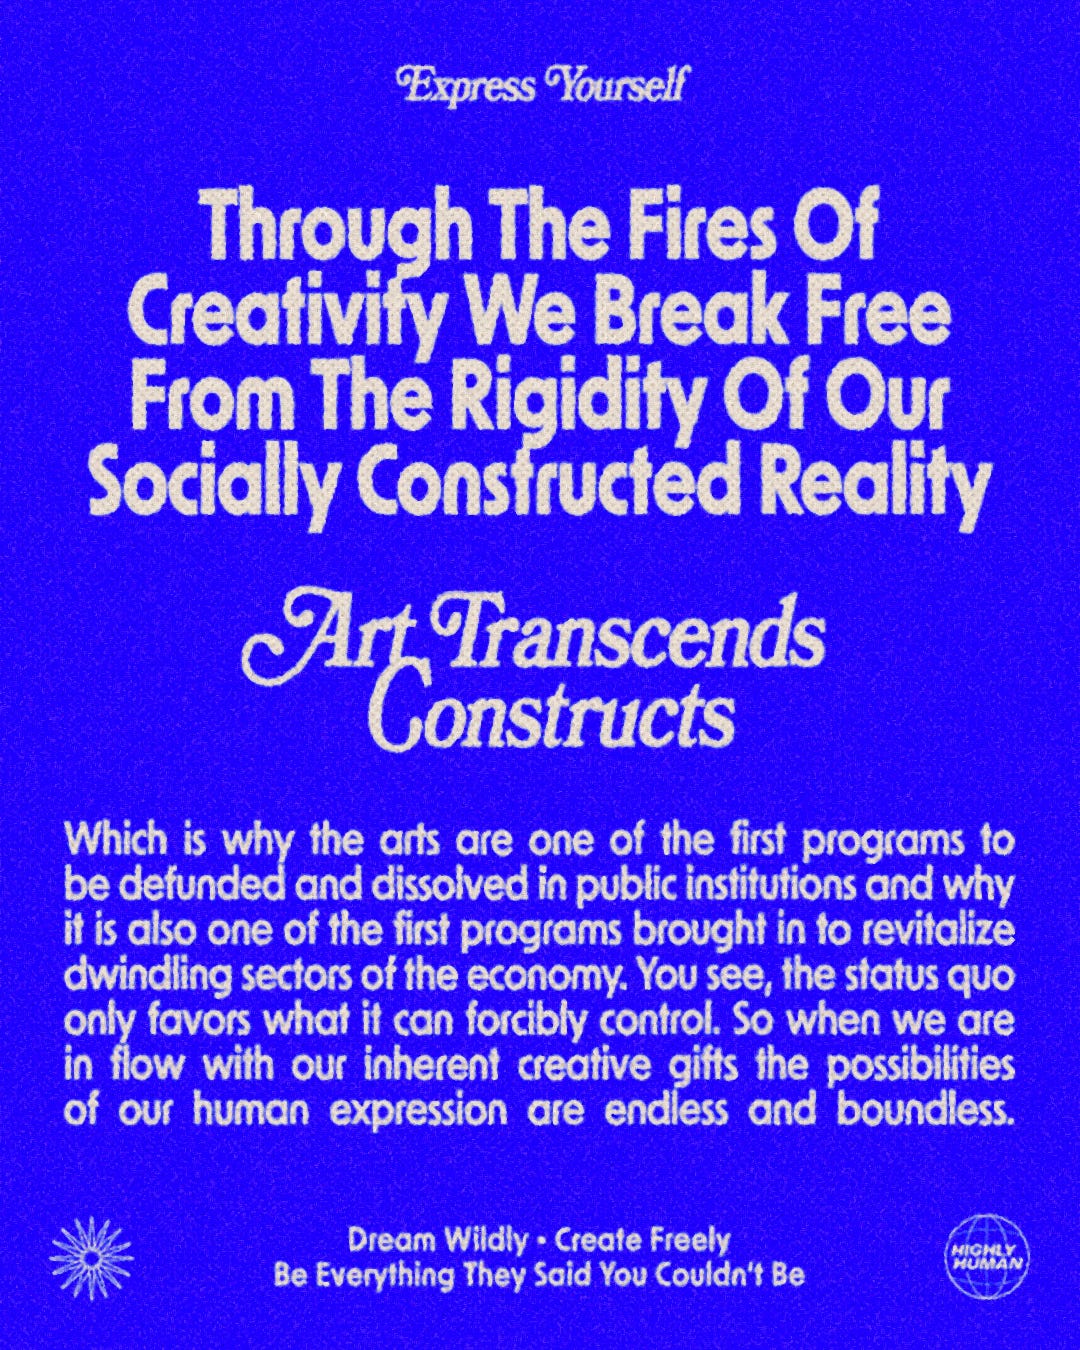 Blue graphic with white text on top that reads: Thru the fires of creativity we break free from the rigidity of our socially constructed reality.  Art transcends constructs.  Which is why the arts are one of the first programs to be defunded & dissolved in public institutions and why it’s also one of the first programs brought in to revitalize dwindling sectors of the economy.   You see, the status quo only favors what it can forcibly control. So when we’re in flow with our inherent creative gifts the possibilities of our human expression are endless & boundless.  Dream wildly  Create freely  Be everything they said you couldn’t be.